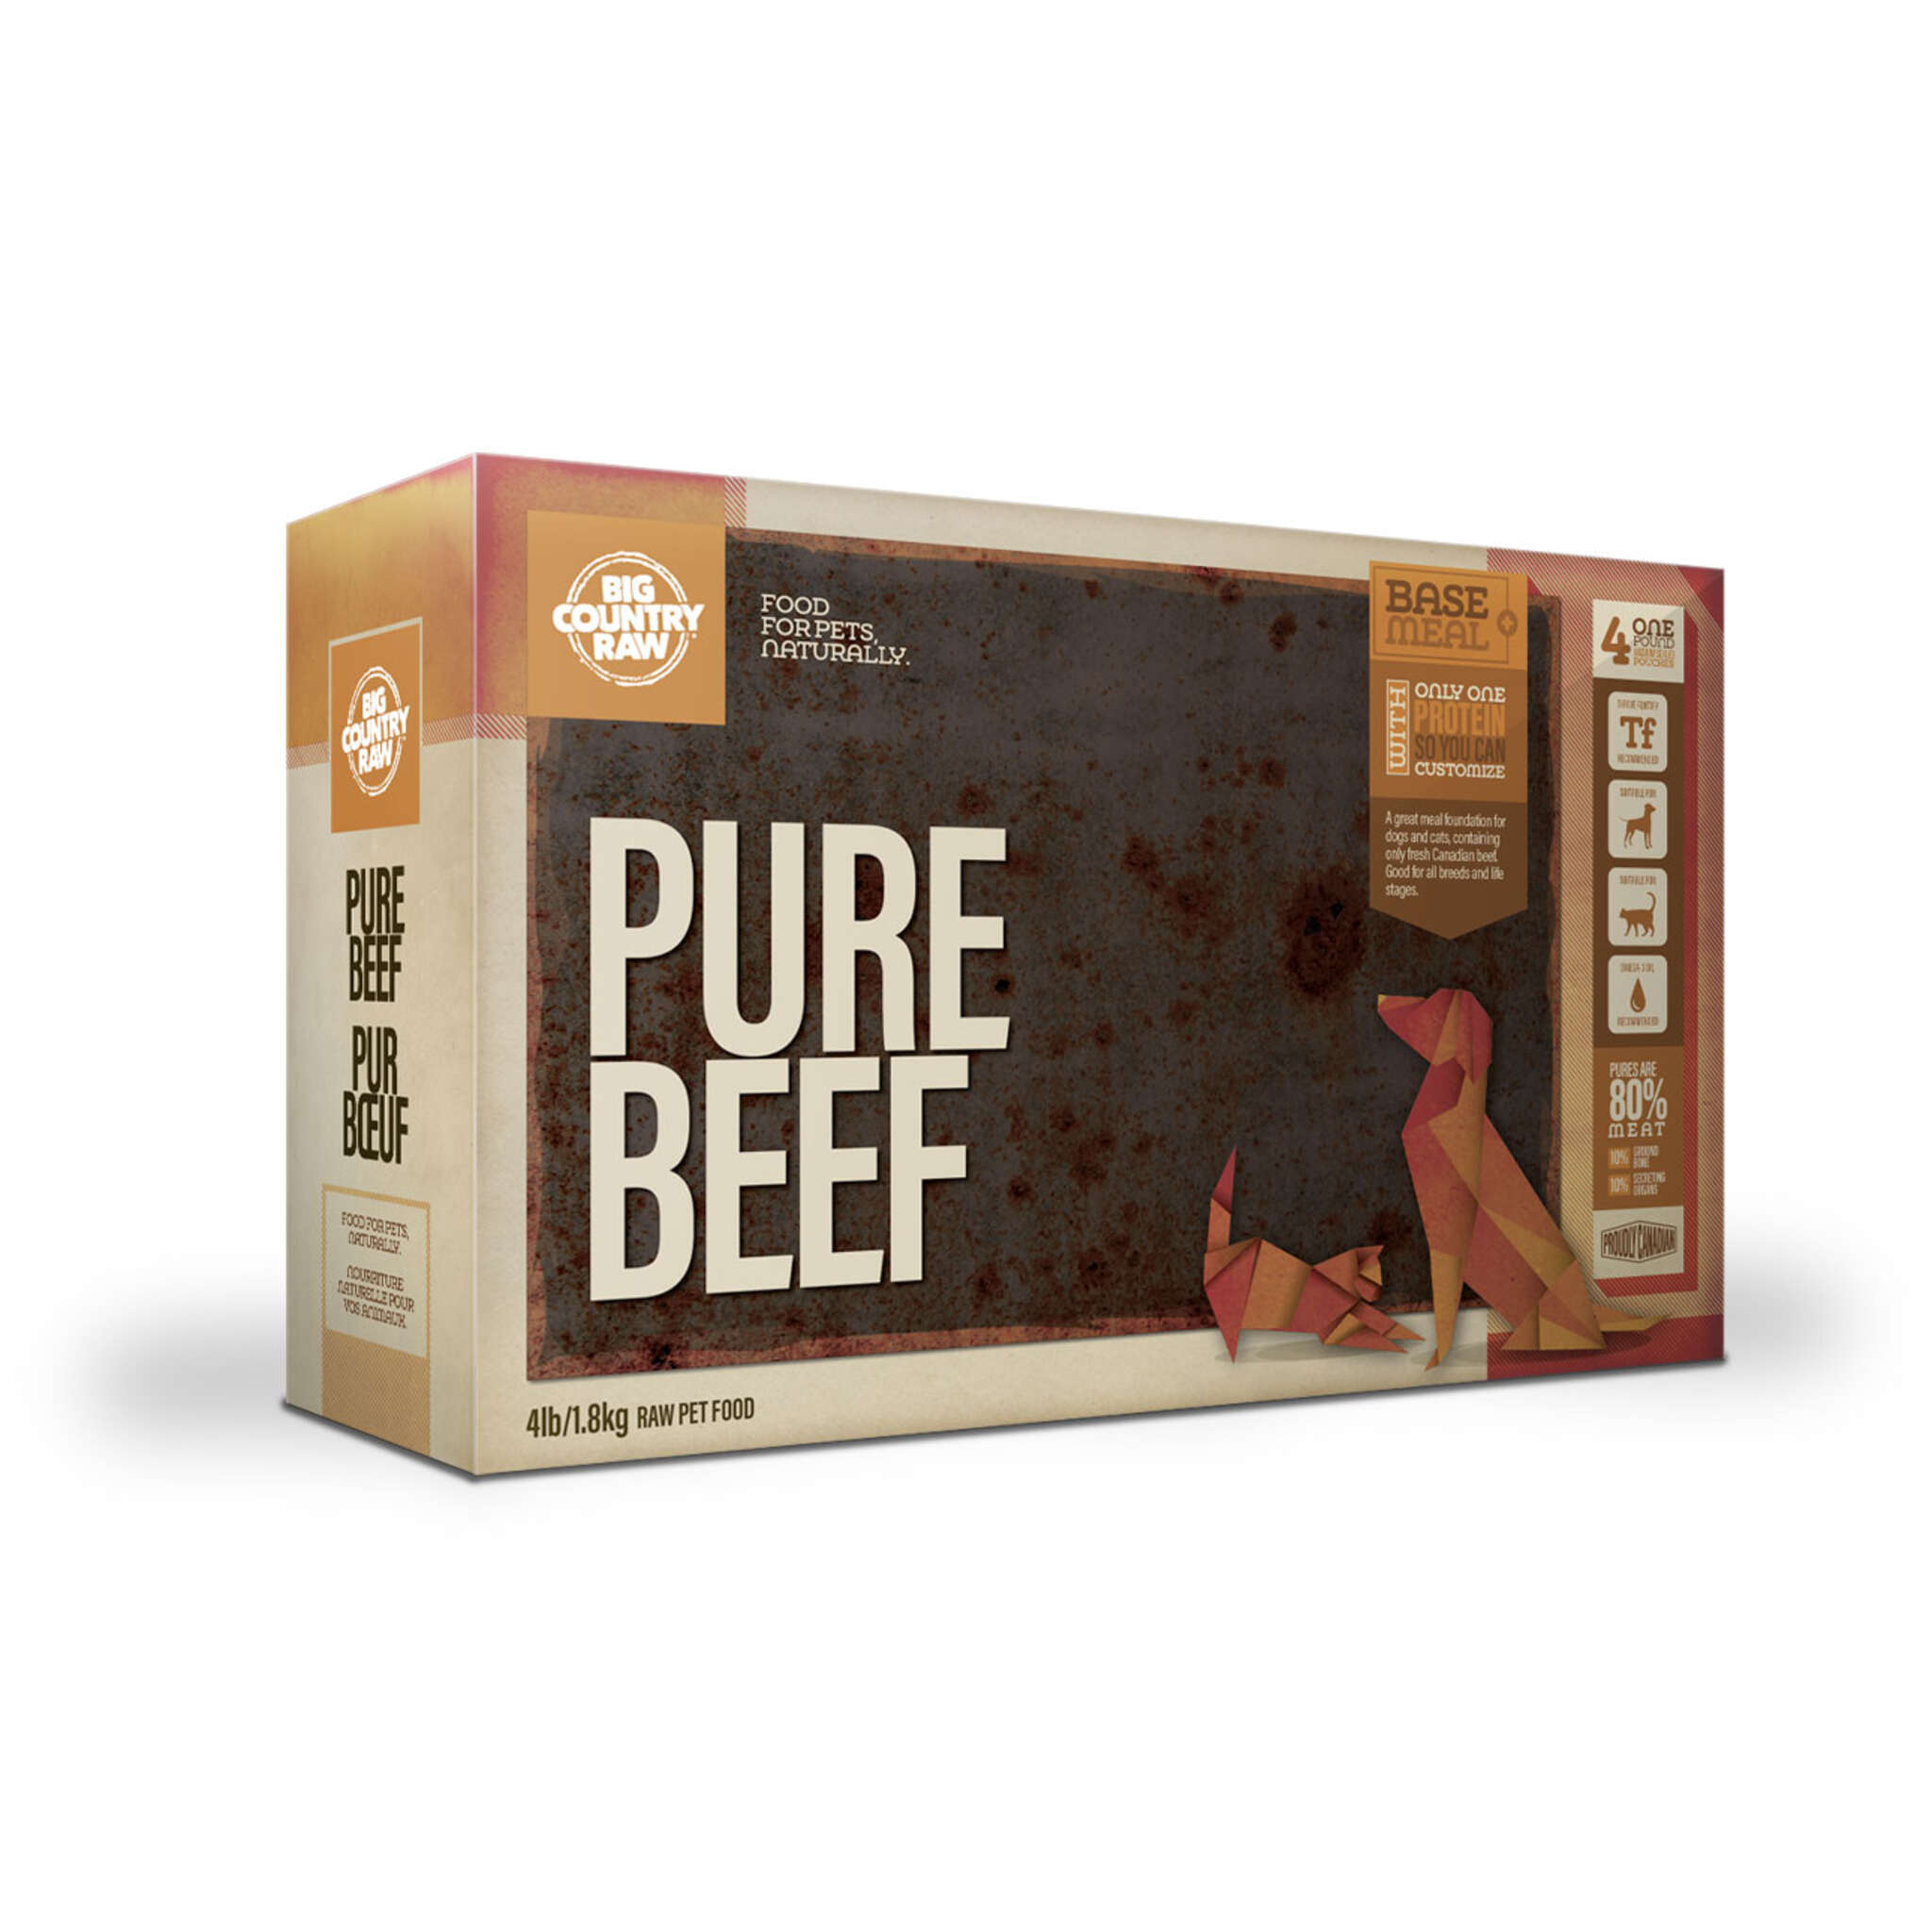 A carton of Big Country Raw dog food, Pure Beef recipe, 4 lb (contains four 1 lb patties), requires supplementation and freezing.